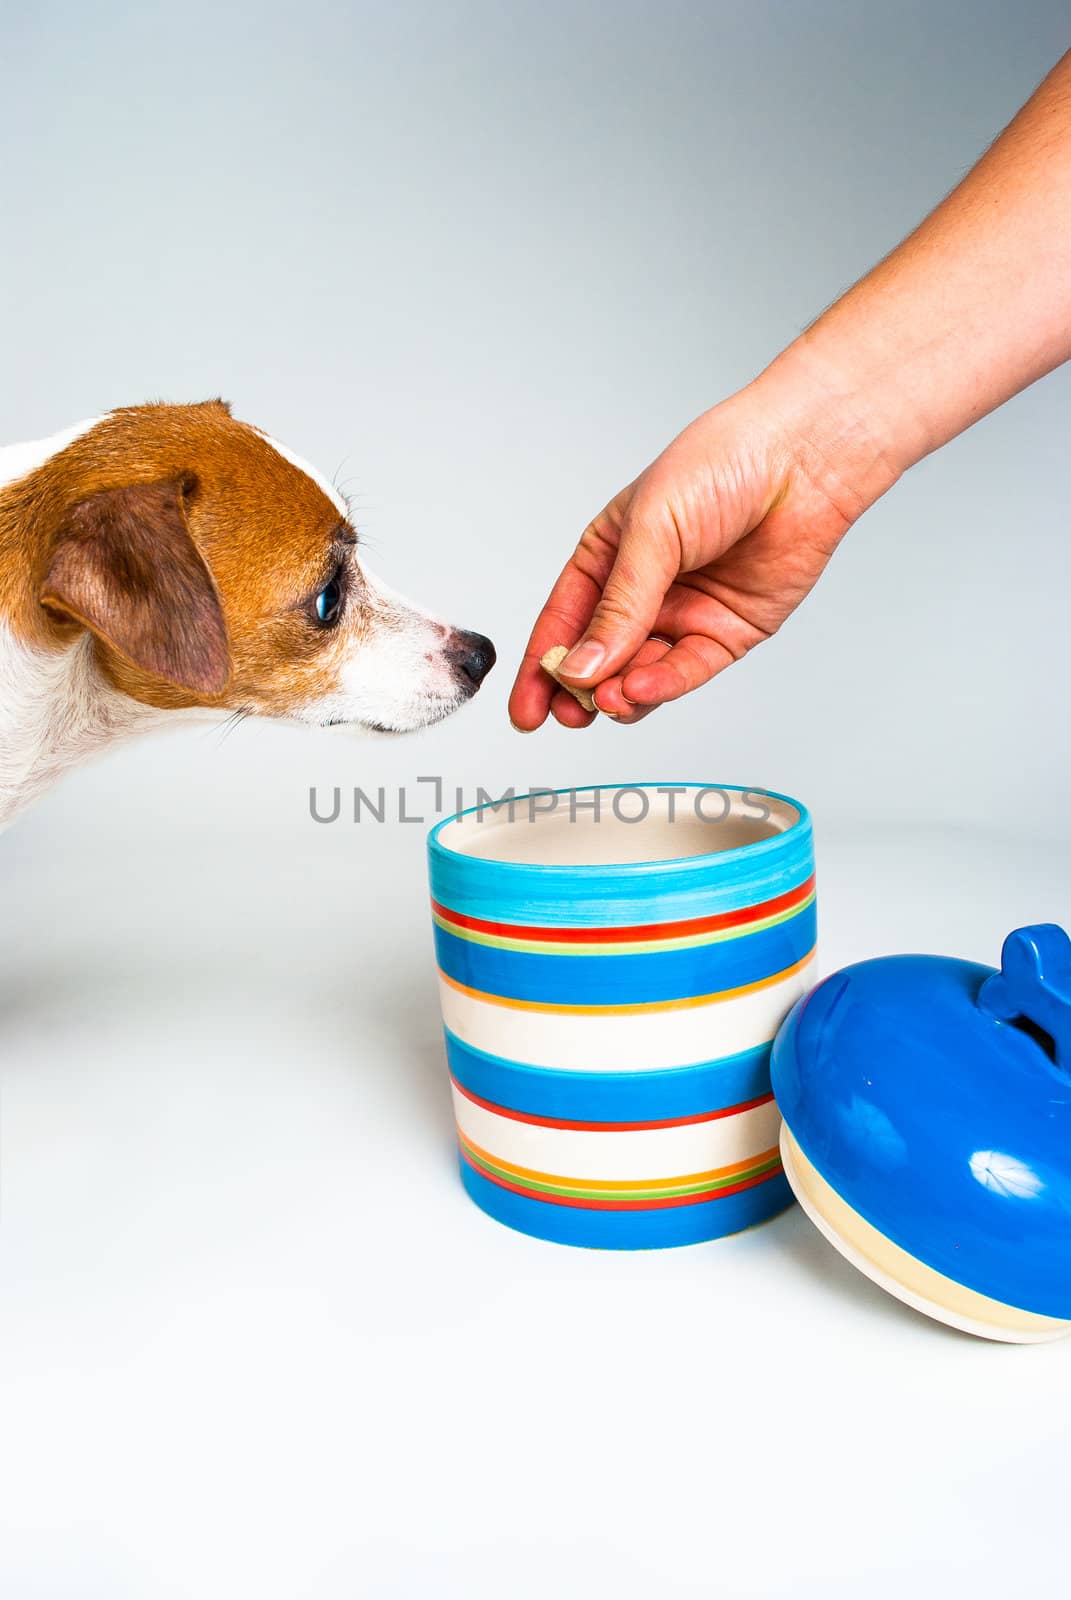 Photograph of a lone Jack Russell about to et a treat from a colorful cookie jar taken on a white background.  Most of Jack Russell is off camera.